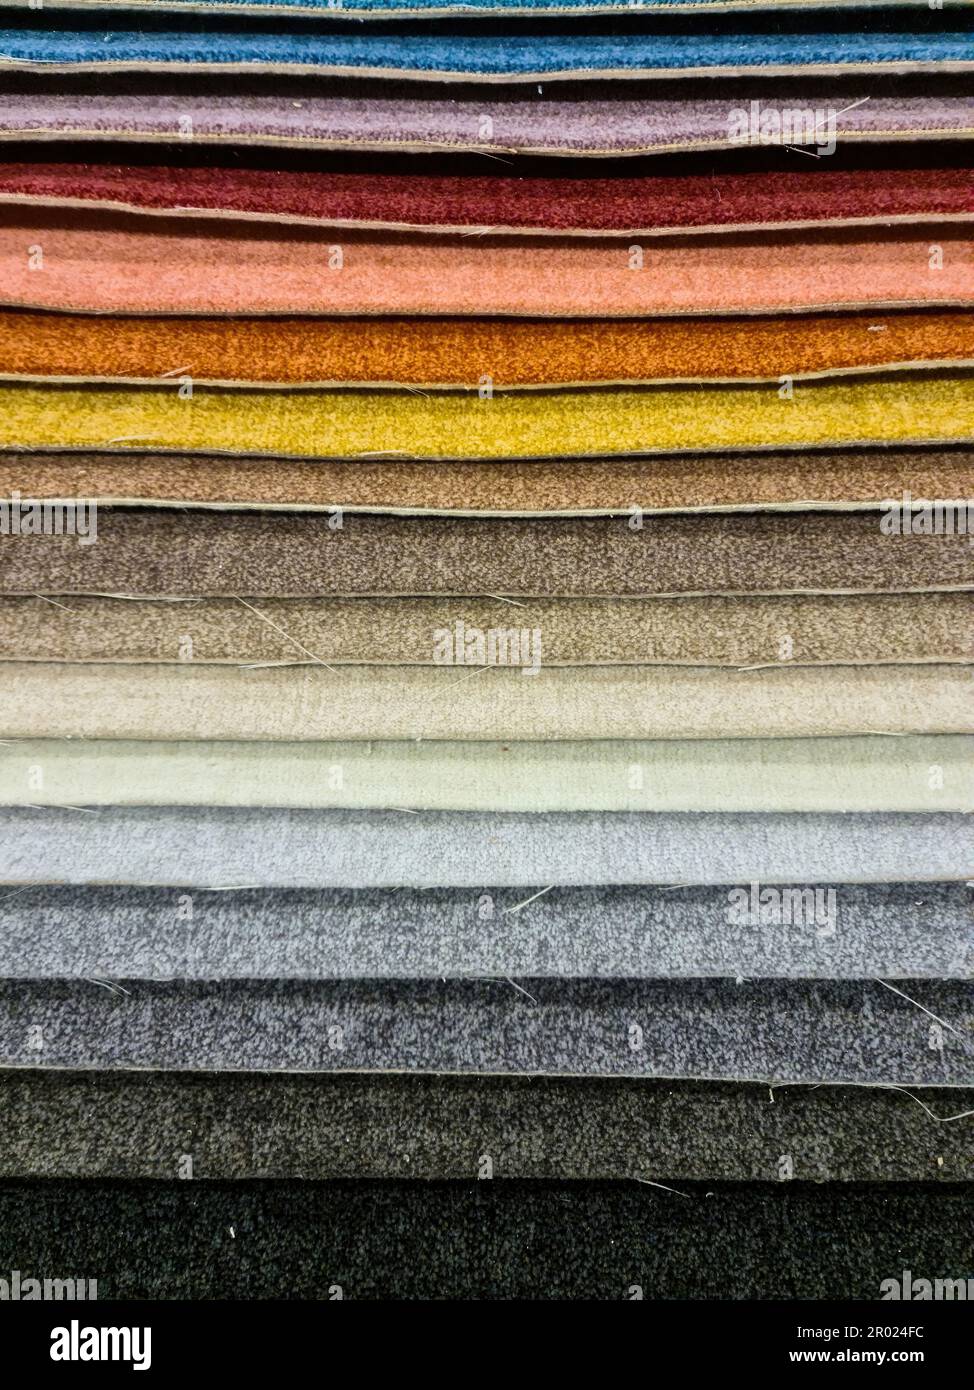 Colorful carpet samples background texture in high resolution Stock Photo